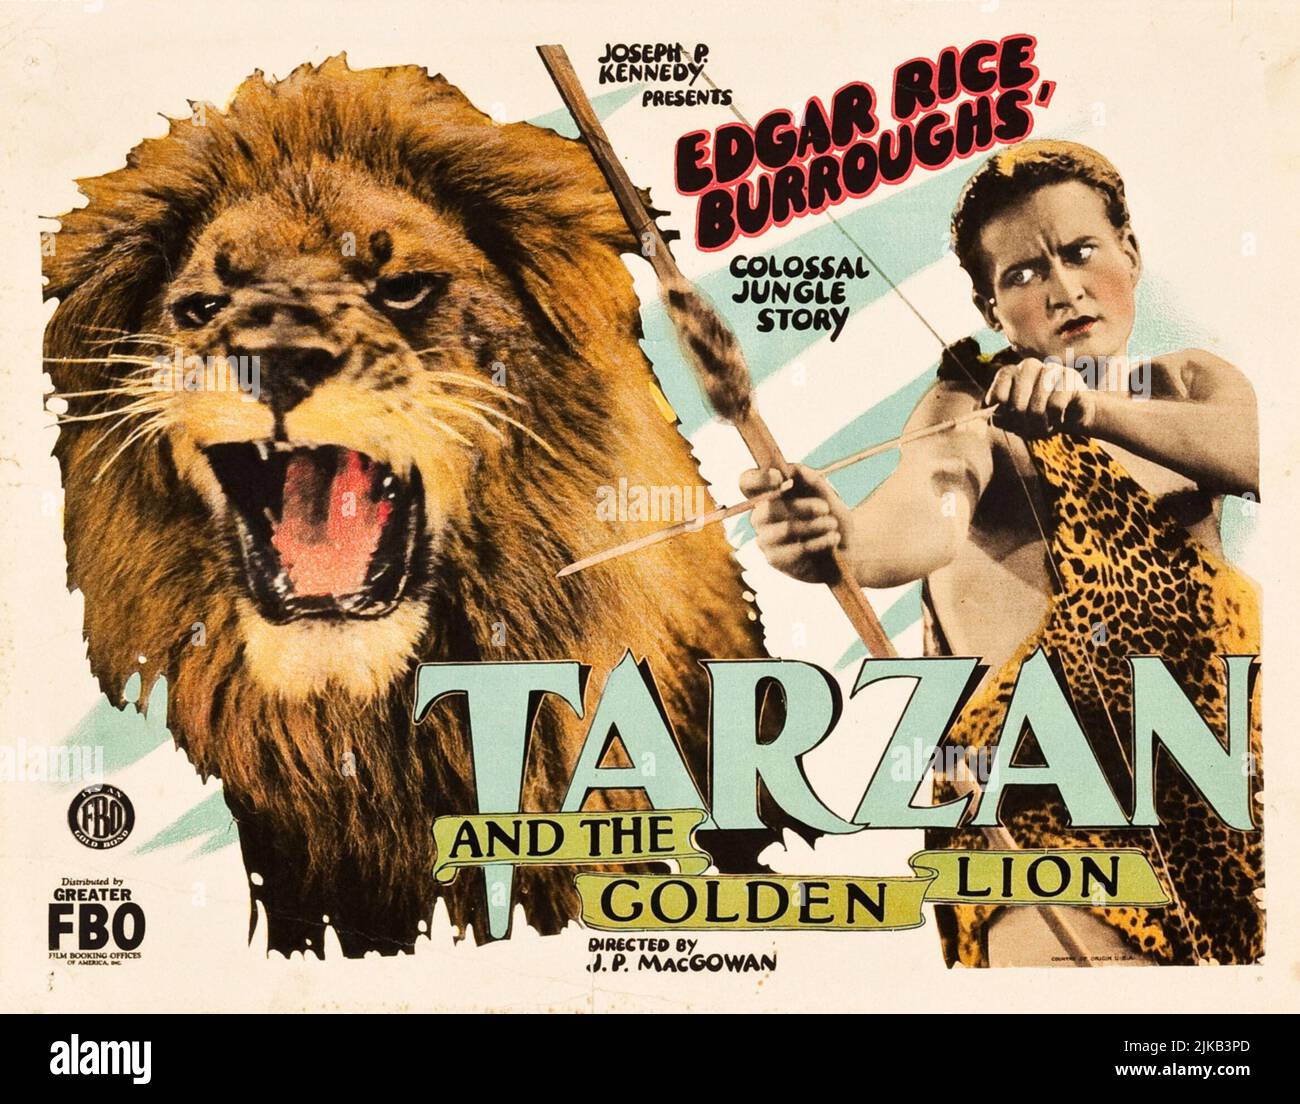 TARZAN AND THE GOLDEN LION (1927), directed by J. P. MCGOWAN. Credit: Robertson-Cole Pictures Corporation / Album Stock Photo